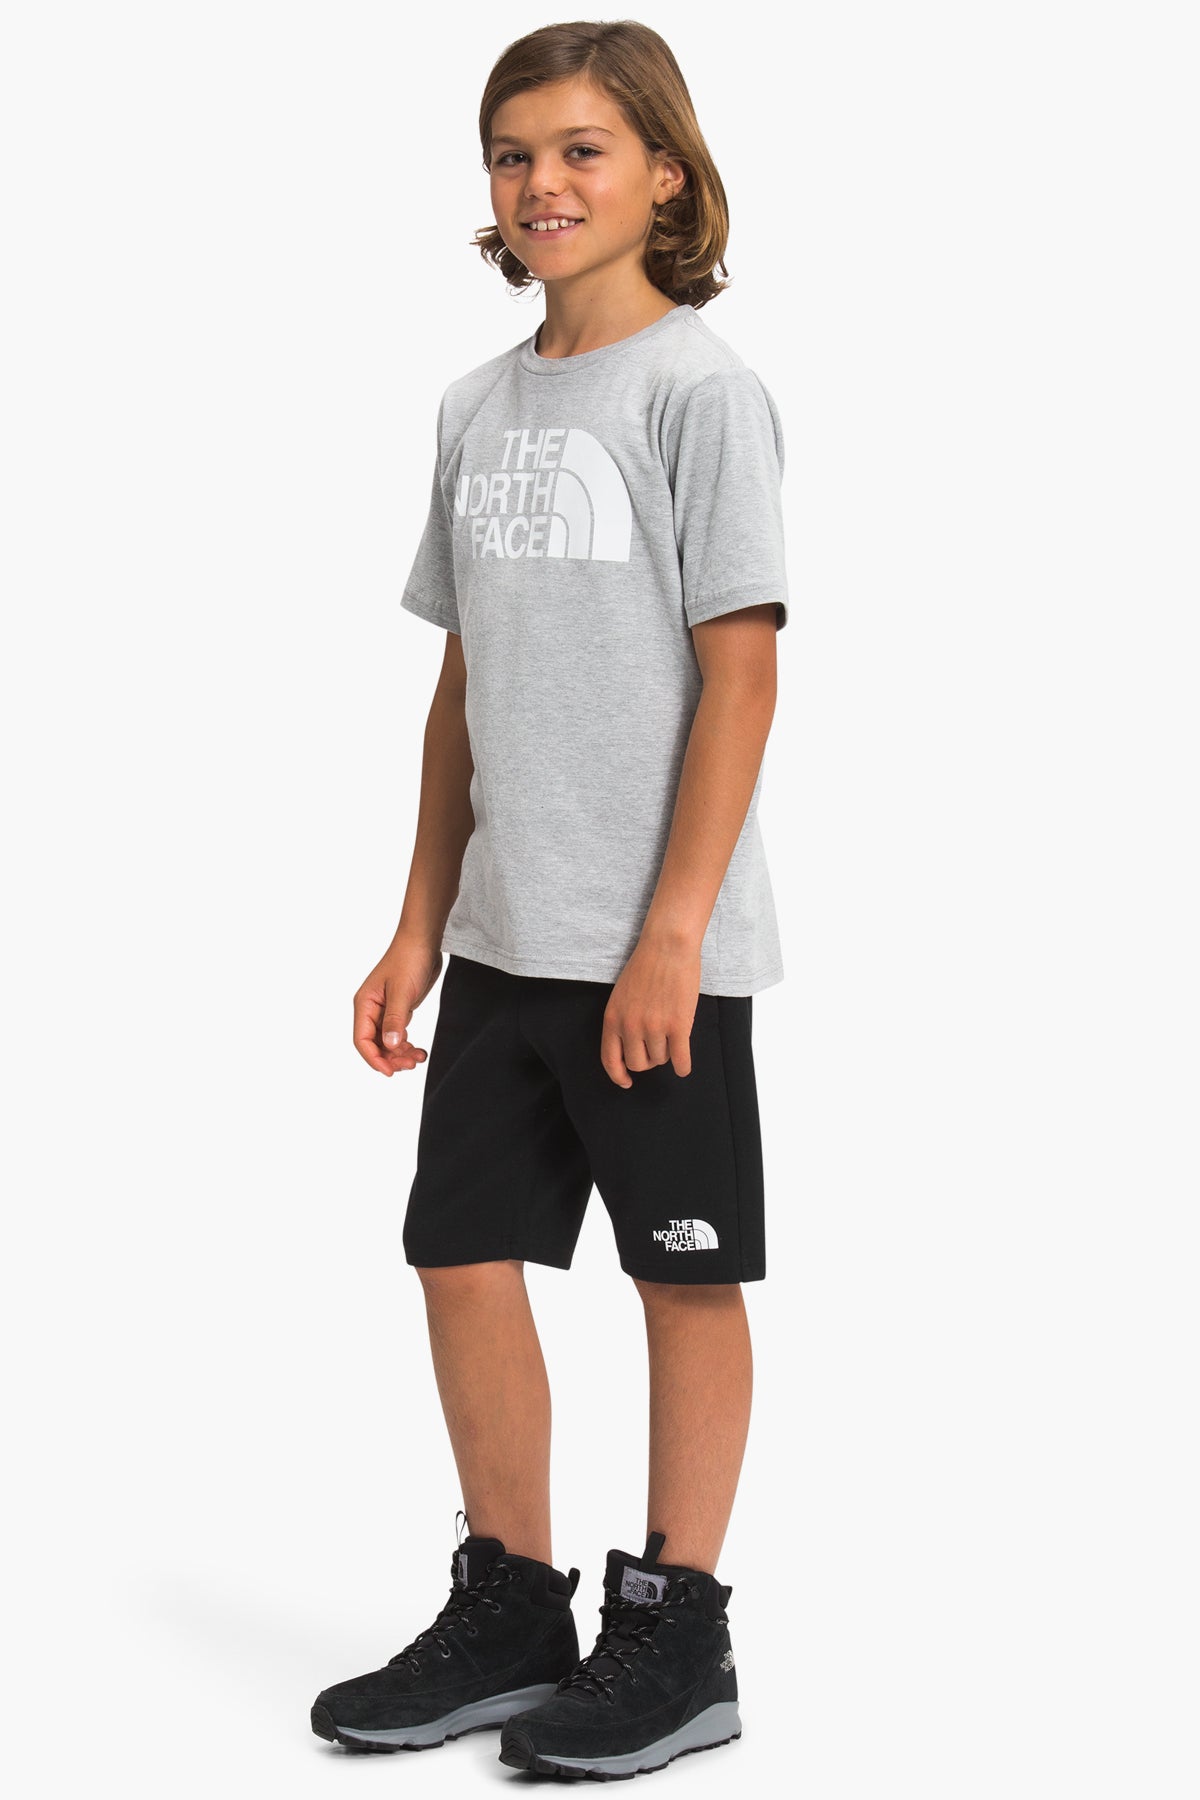 Kids Sports Clothes